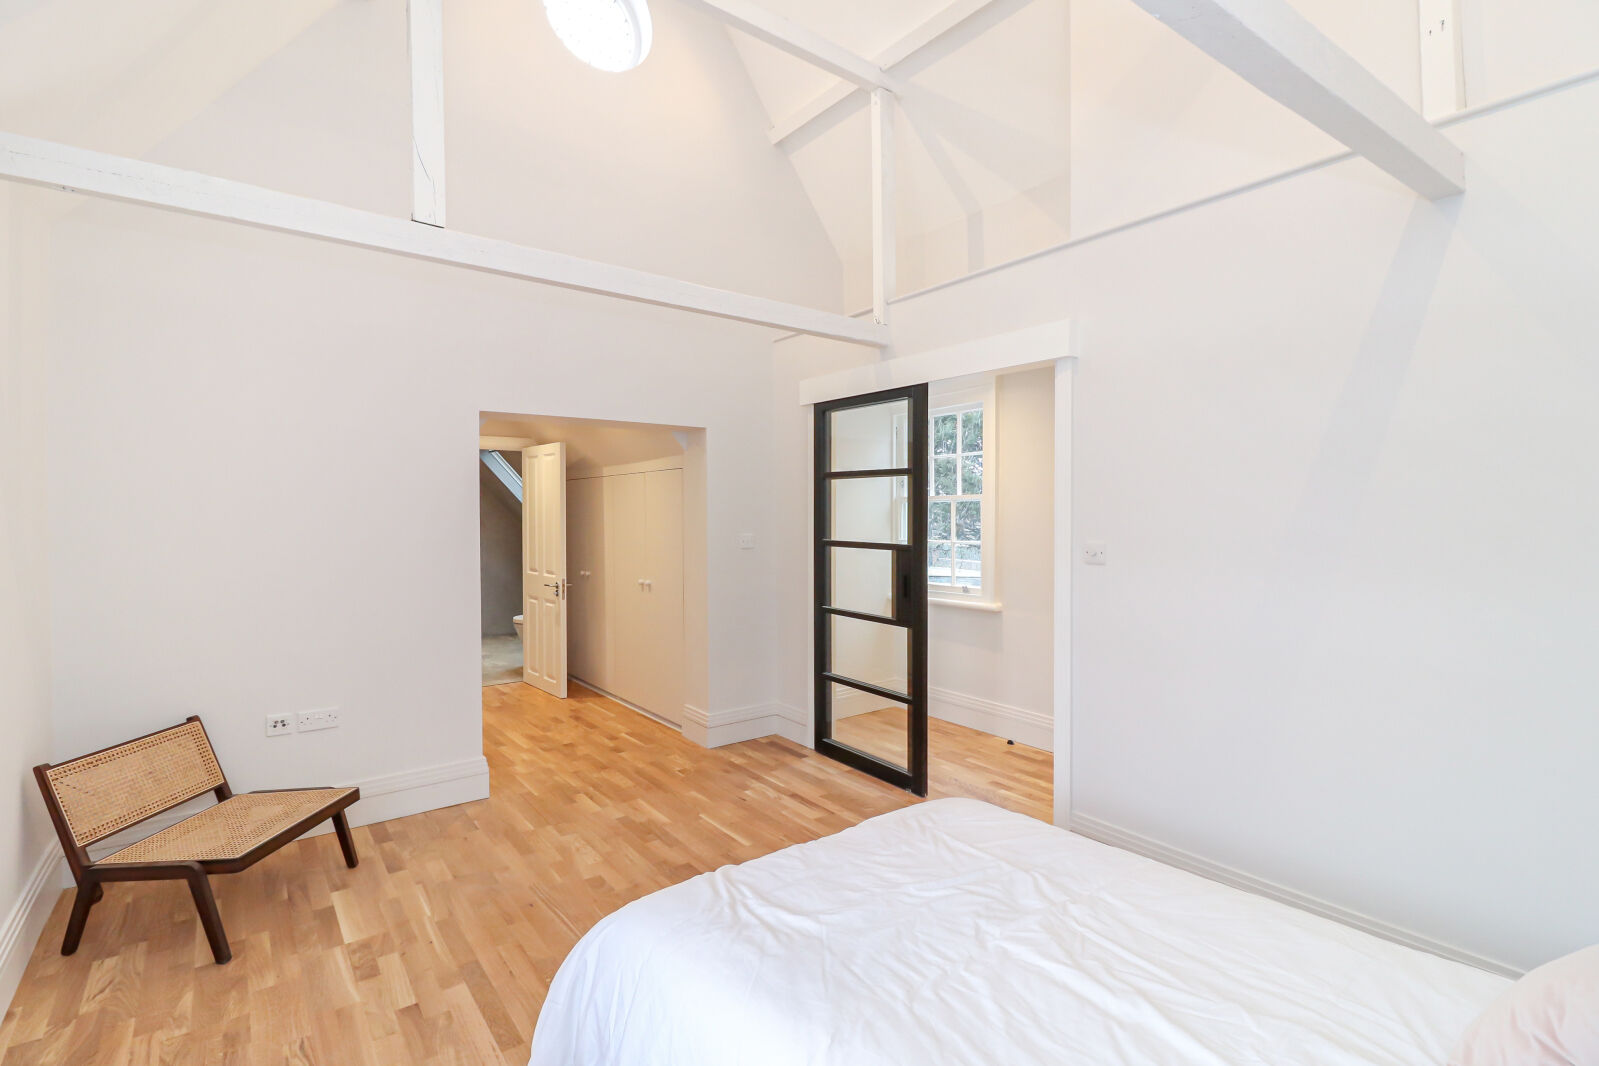 1 bedroom  flat for sale Wickham House, 2 Cressex Road, HP12, main image